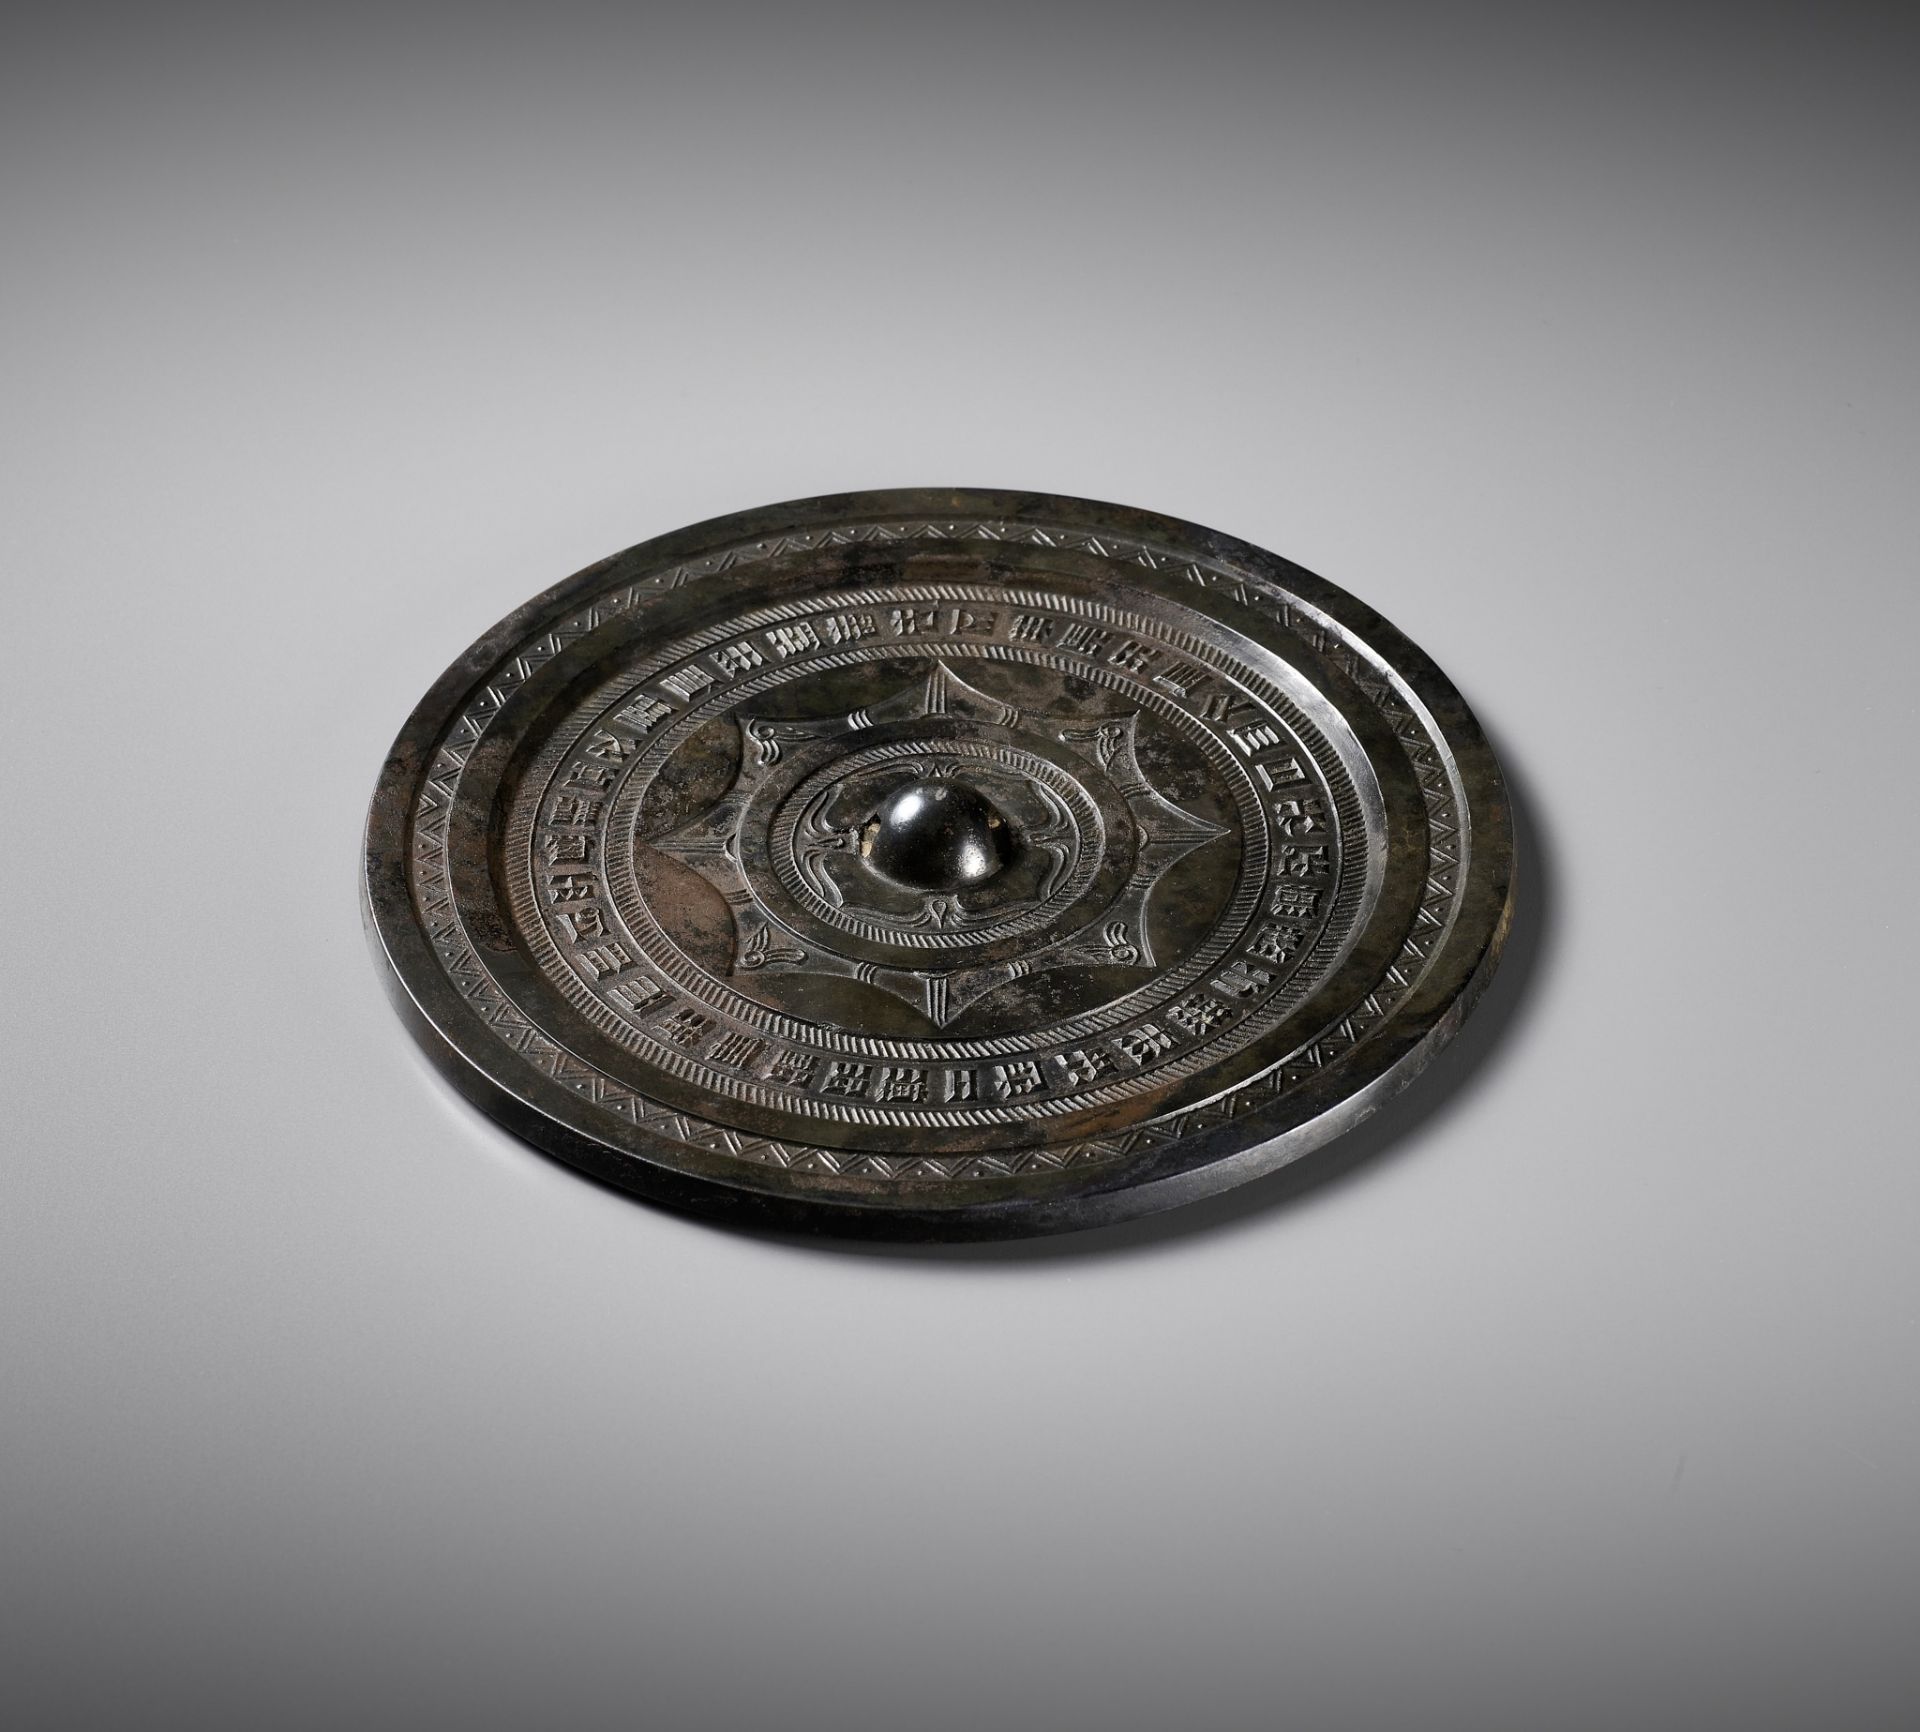 A LARGE BRONZE MIRROR WITH A 37-CHARACTER INSCRIPTION, HAN DYNASTY, CHINA, 206 BC-220 AD - Image 3 of 16